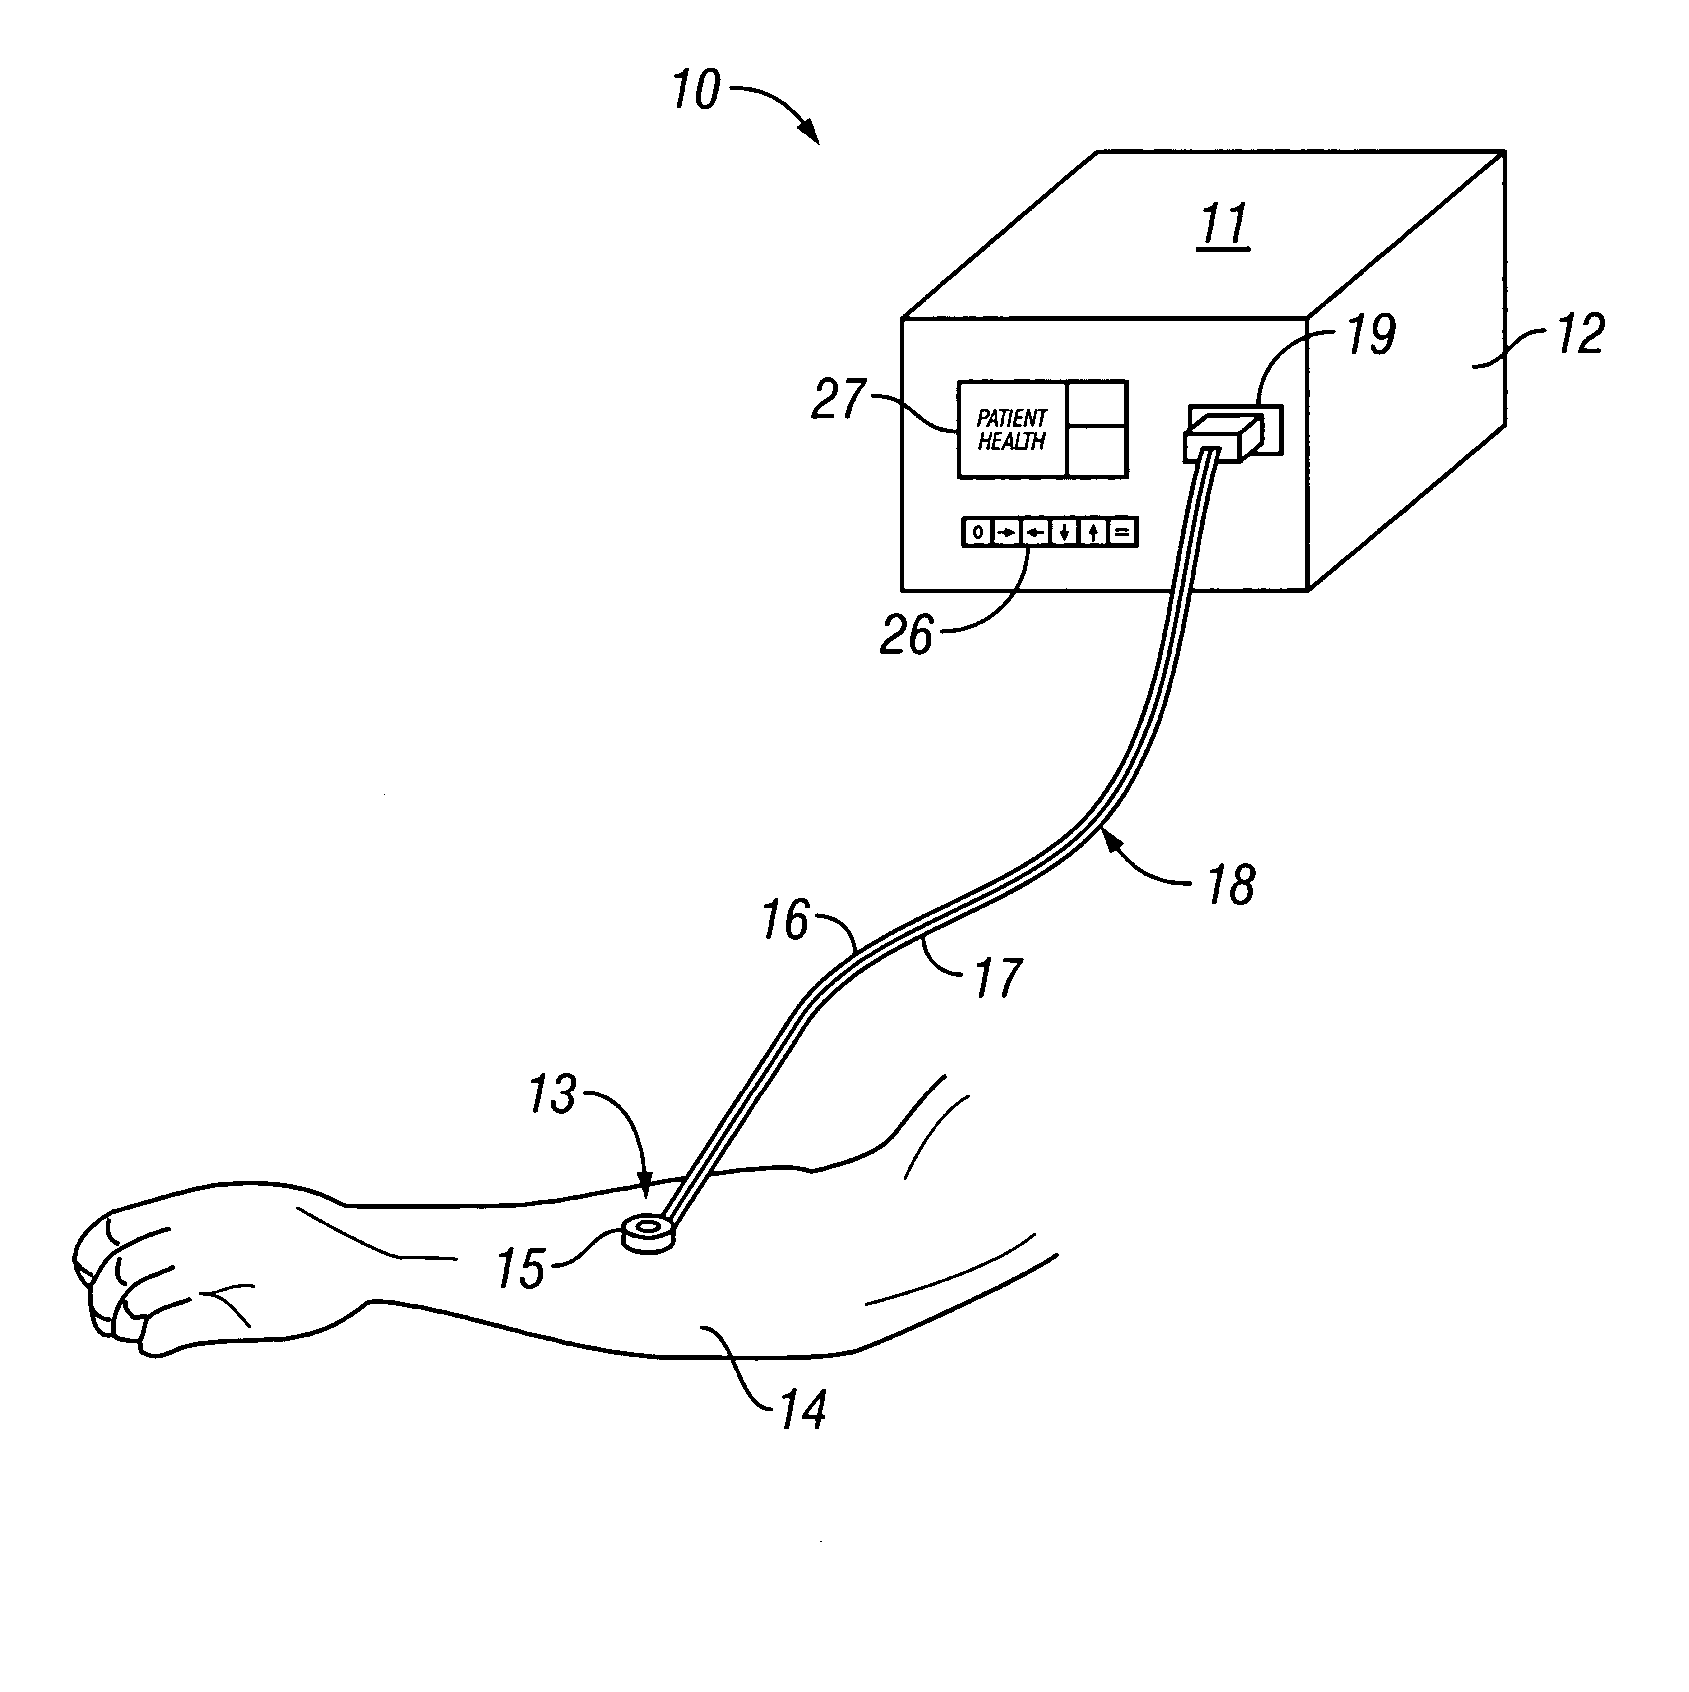 System for combined transcutaneous blood gas monitoring and negative pressure wound treatment